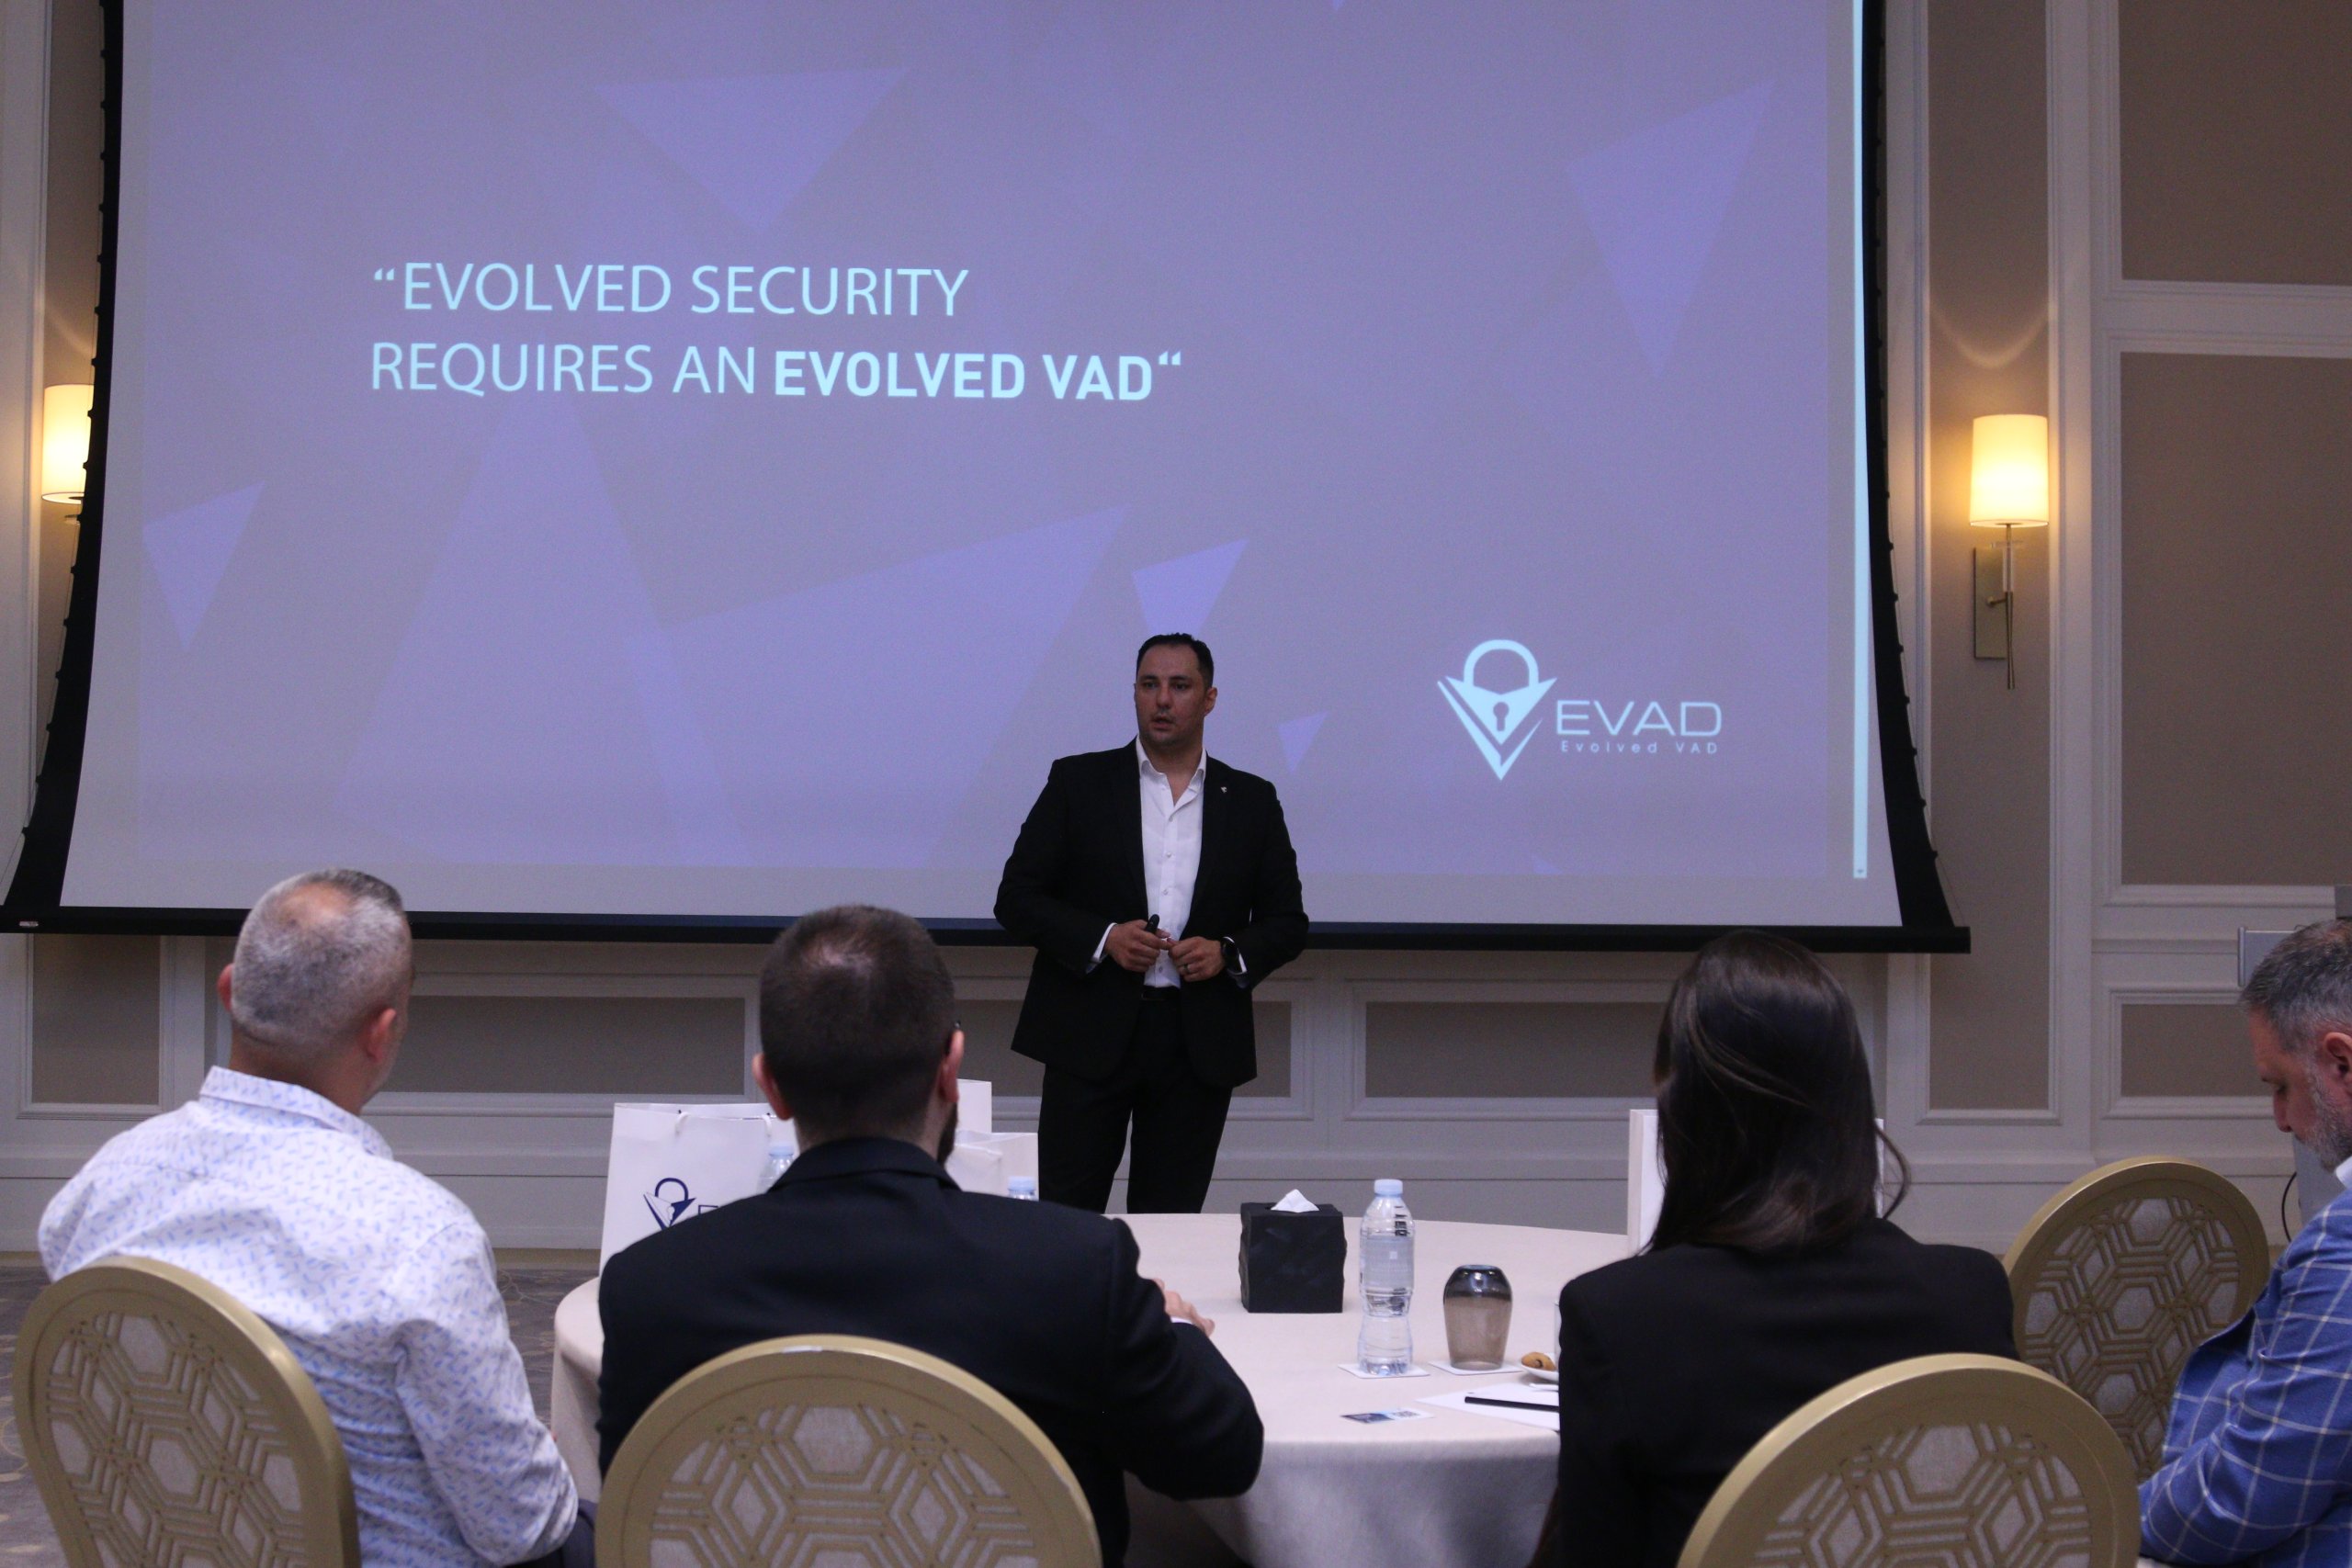 EVAD Channel Summit outlines ongoing enterprise plans